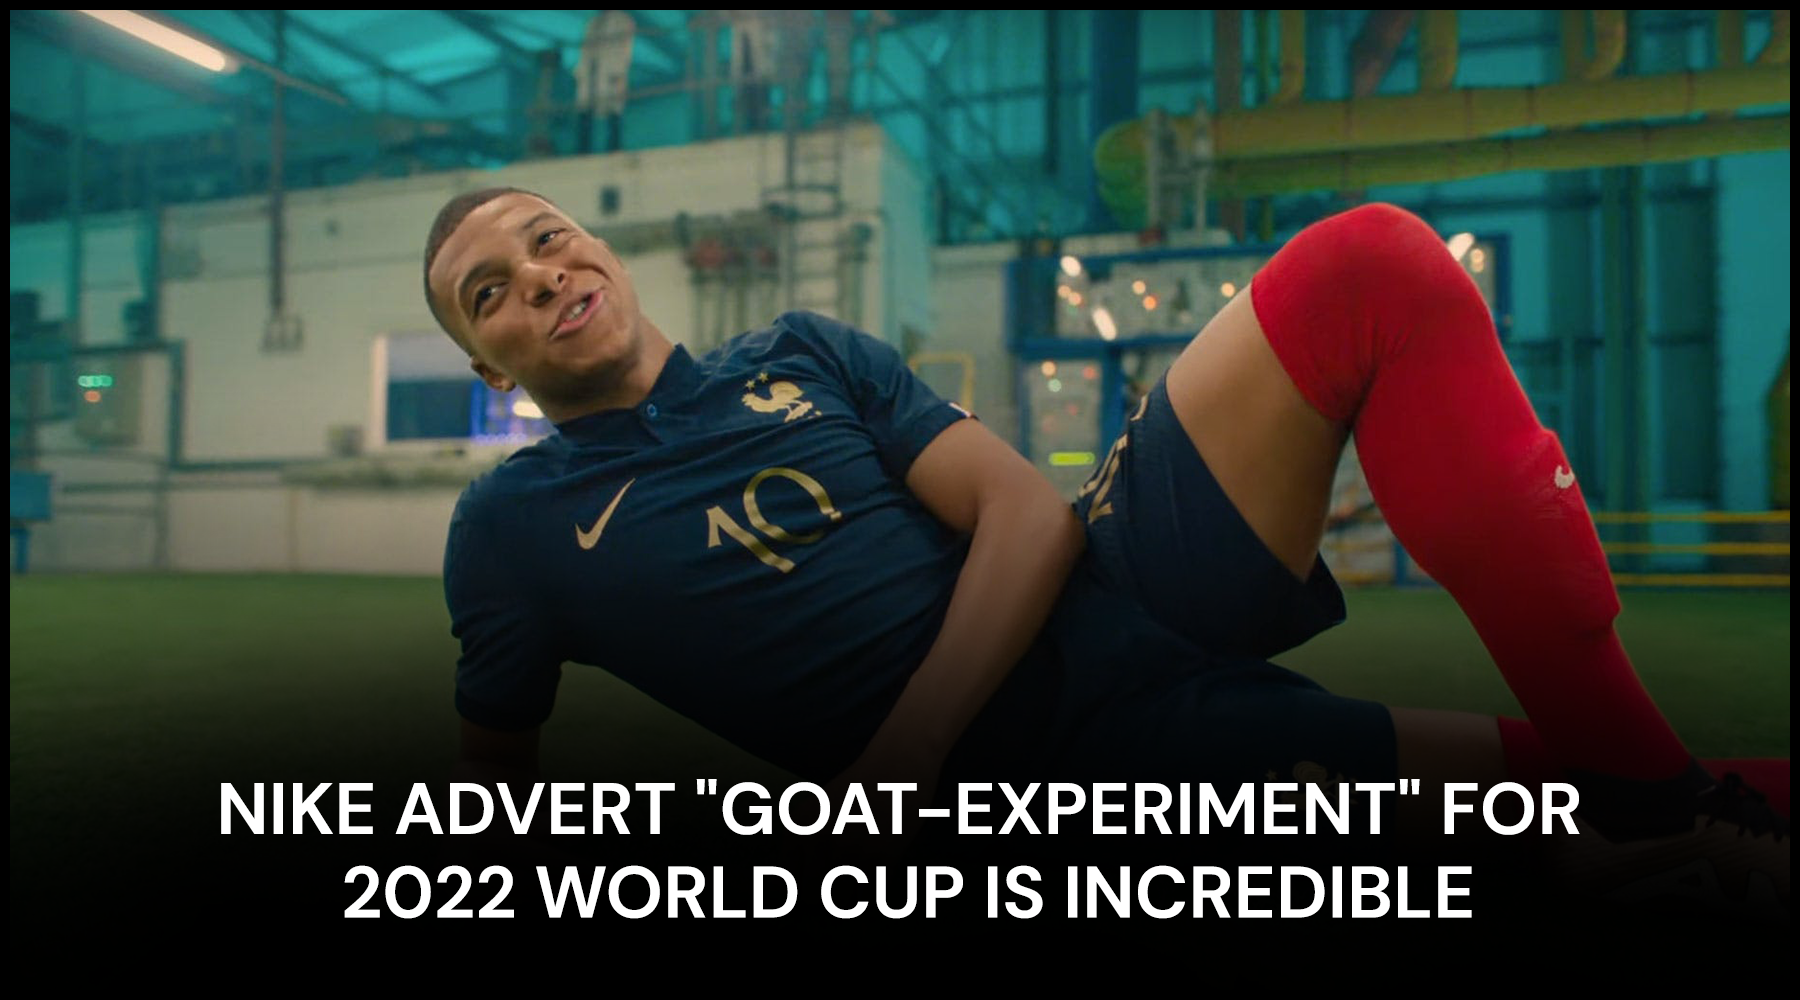 Nike advert GOAT-Experiment for 2022 World Cup is incredible